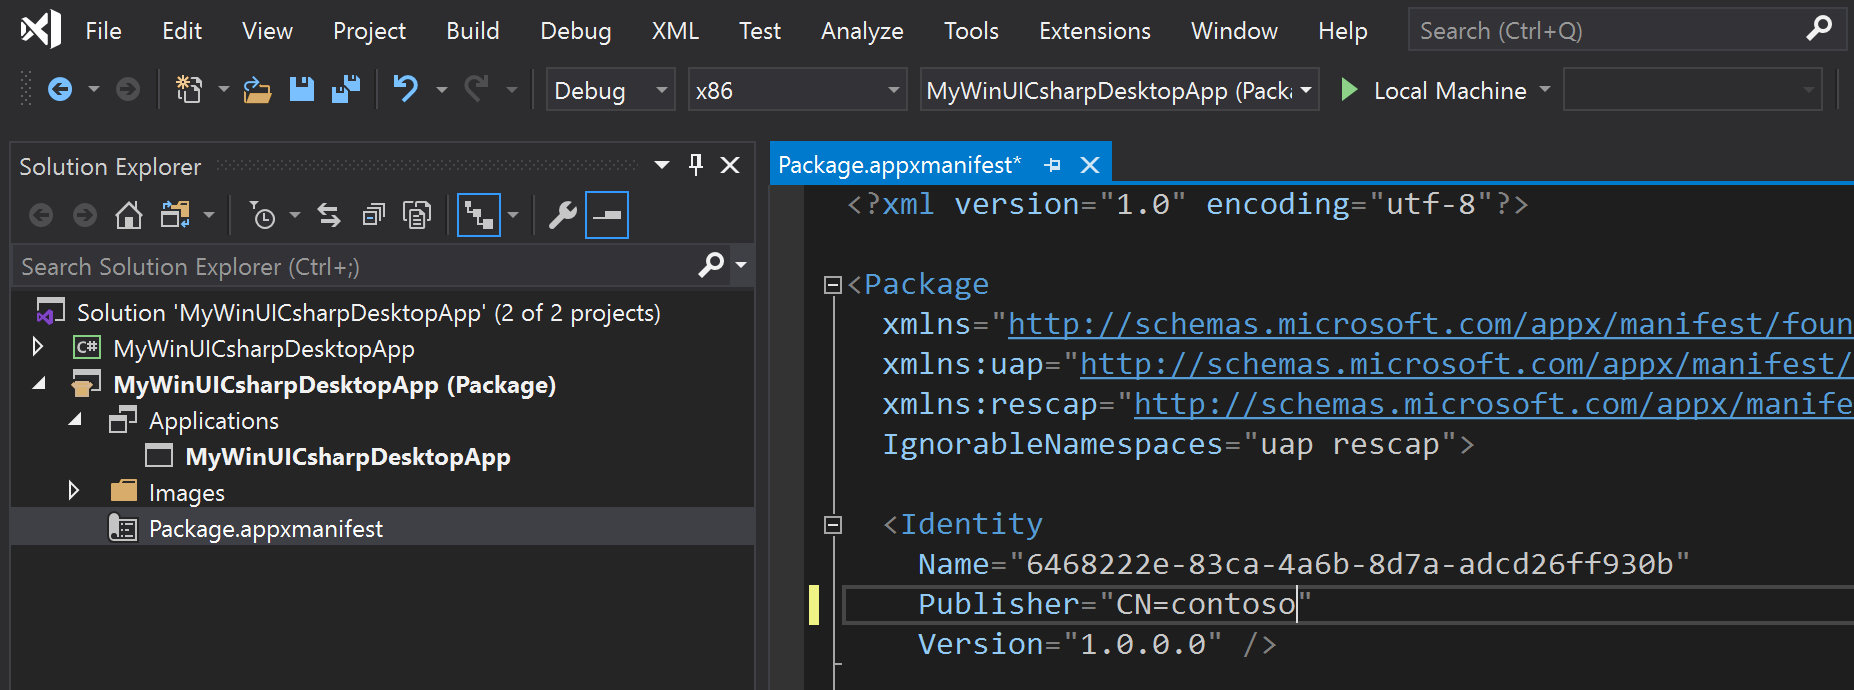 Screenshot of Visual Studio showing the Solution Explorer pane and the contents of the Package app x manifest file.